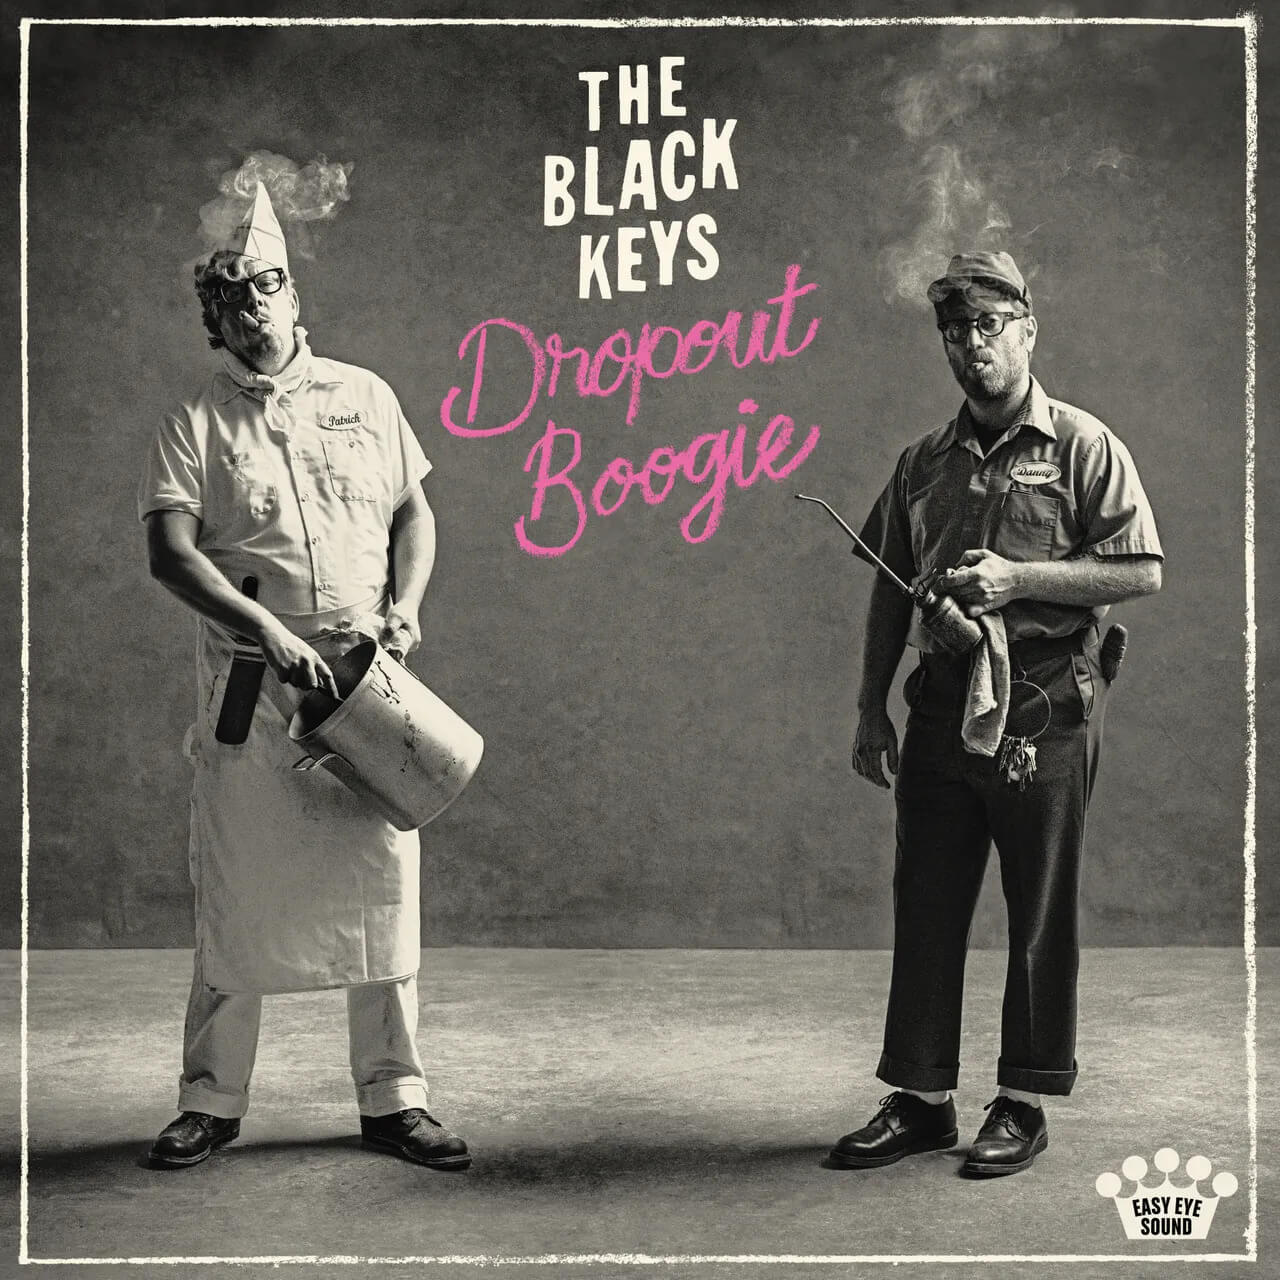 Dropout Boogie by The Black Keys Album Review by Robert Duguay for Northern Transmissions